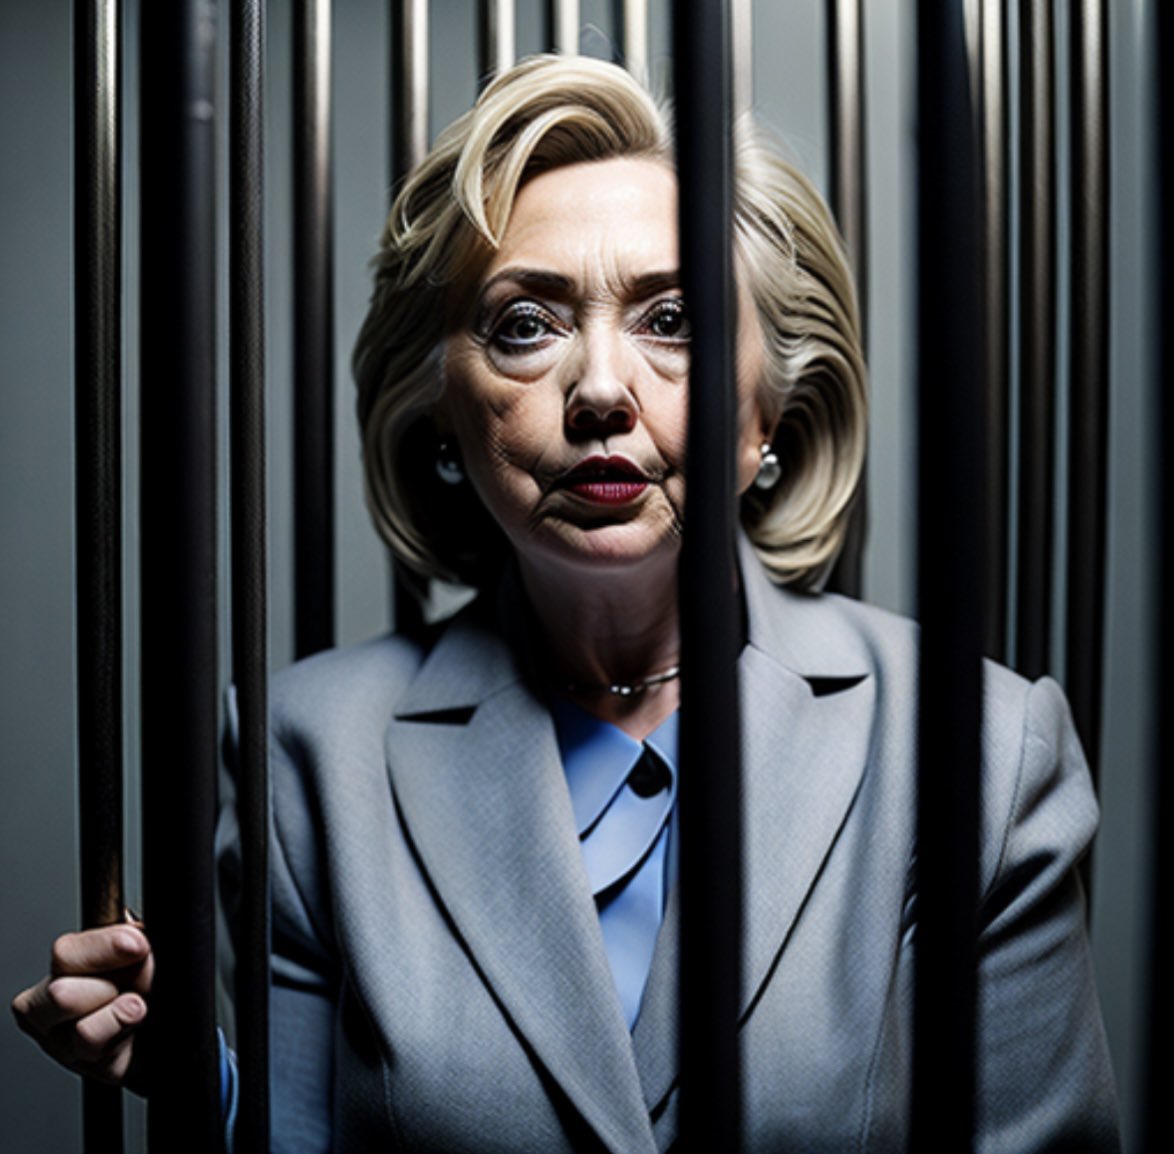 Should Hillary Clinton be going to prison instead of Donald Trump?